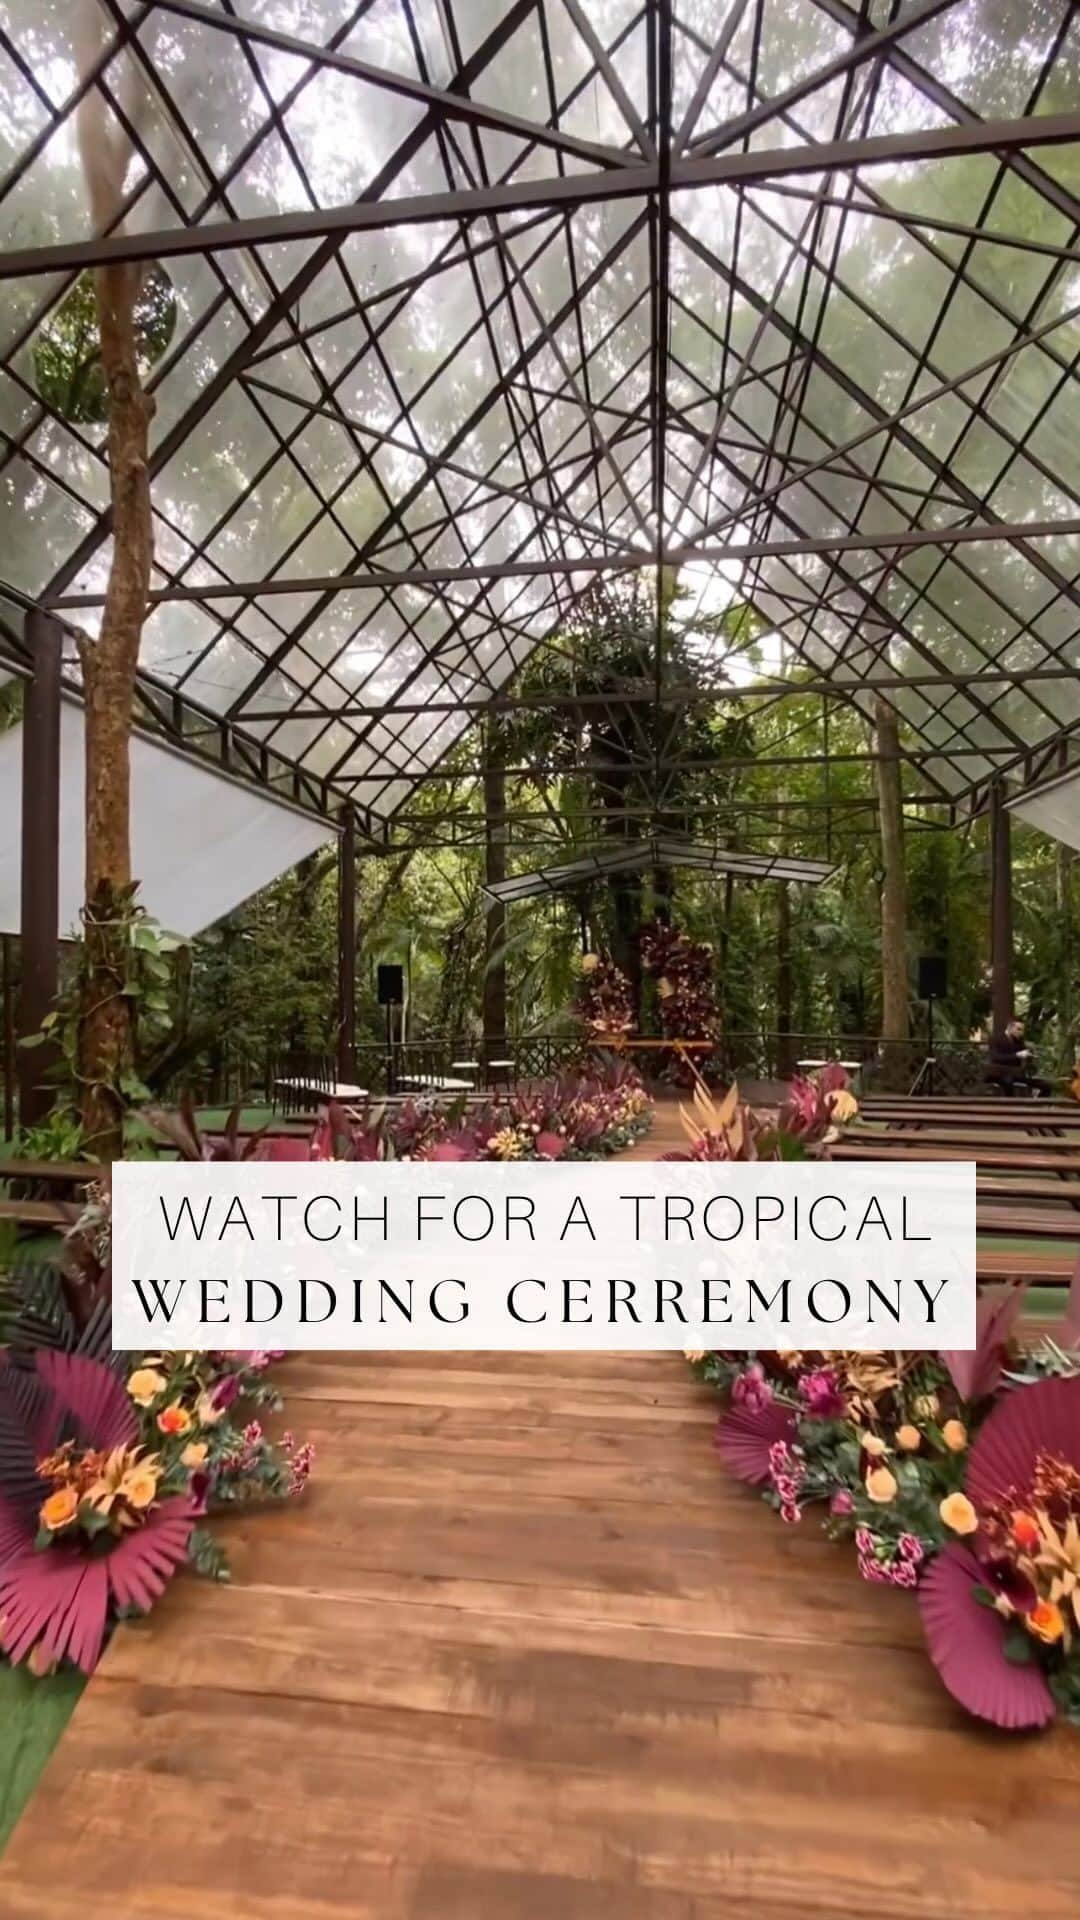 WEDDING APPARELのインスタグラム：「POV: You’re having the destination wedding of your dreams in São Paulo 😍 From the glass tent to the tropical floral designs, it’s safe to say that we’re obsessed with every little detail of this ceremony! Tag a friend who is opting for a destination wedding in the comments ⬇️   Planner: @casagiardinoeventos  Decor: @naomi_decor Photographer: @thiagofariasfotos  Consultant: @renatasponda.assessoria Buffet: @estacaocarrara Desserts: @docespetitemarie MUA: @jess.monge  #weddinginspo #bohowedding  #weddingplanning #weddingflowers #weddingarch  #weddingaisle  #weddingdetails #weddingdecor #weddingflowers  #weddingday #weddingideas #weddingdecoration #weddinginspiration  #weddingaisledecor #floraldesign #weddingcenterpiece #weddingflowers #weddingideas #floralarch #weddingceremony #weddings  #eventstylist #eventdesign #luxuryflowers #weddingceremonydecor  #weddinginspiration  #weddingwednesday #bohoweddingdecor」